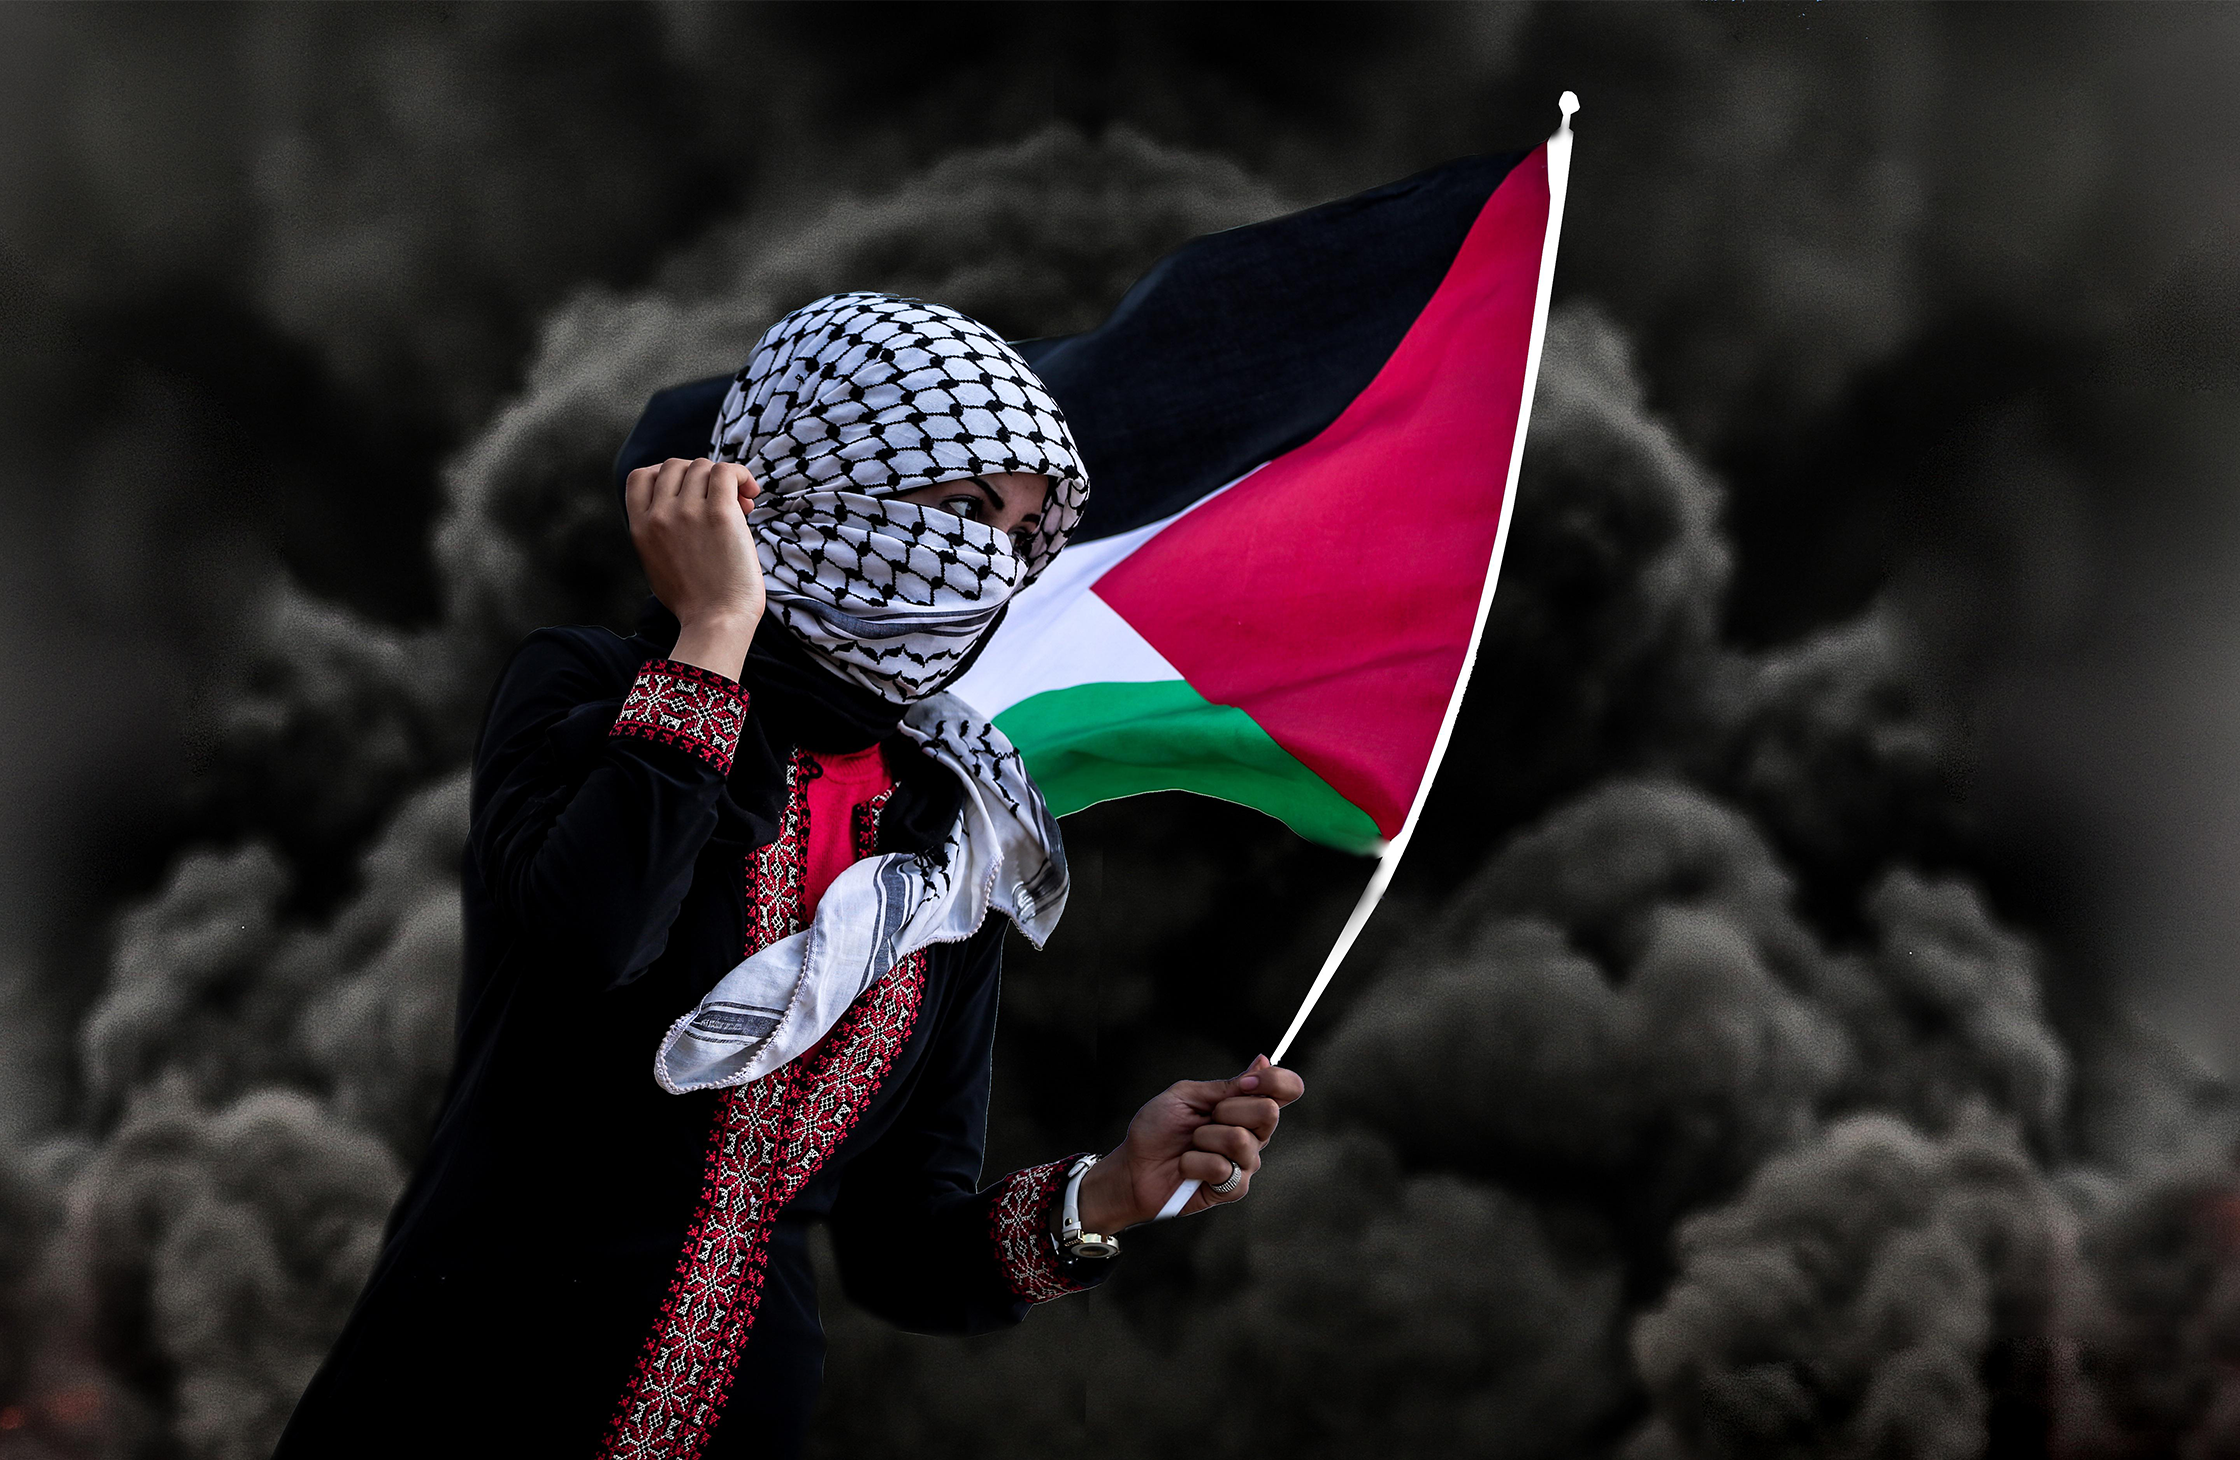 An image of a woman holding the Palestinian flag.